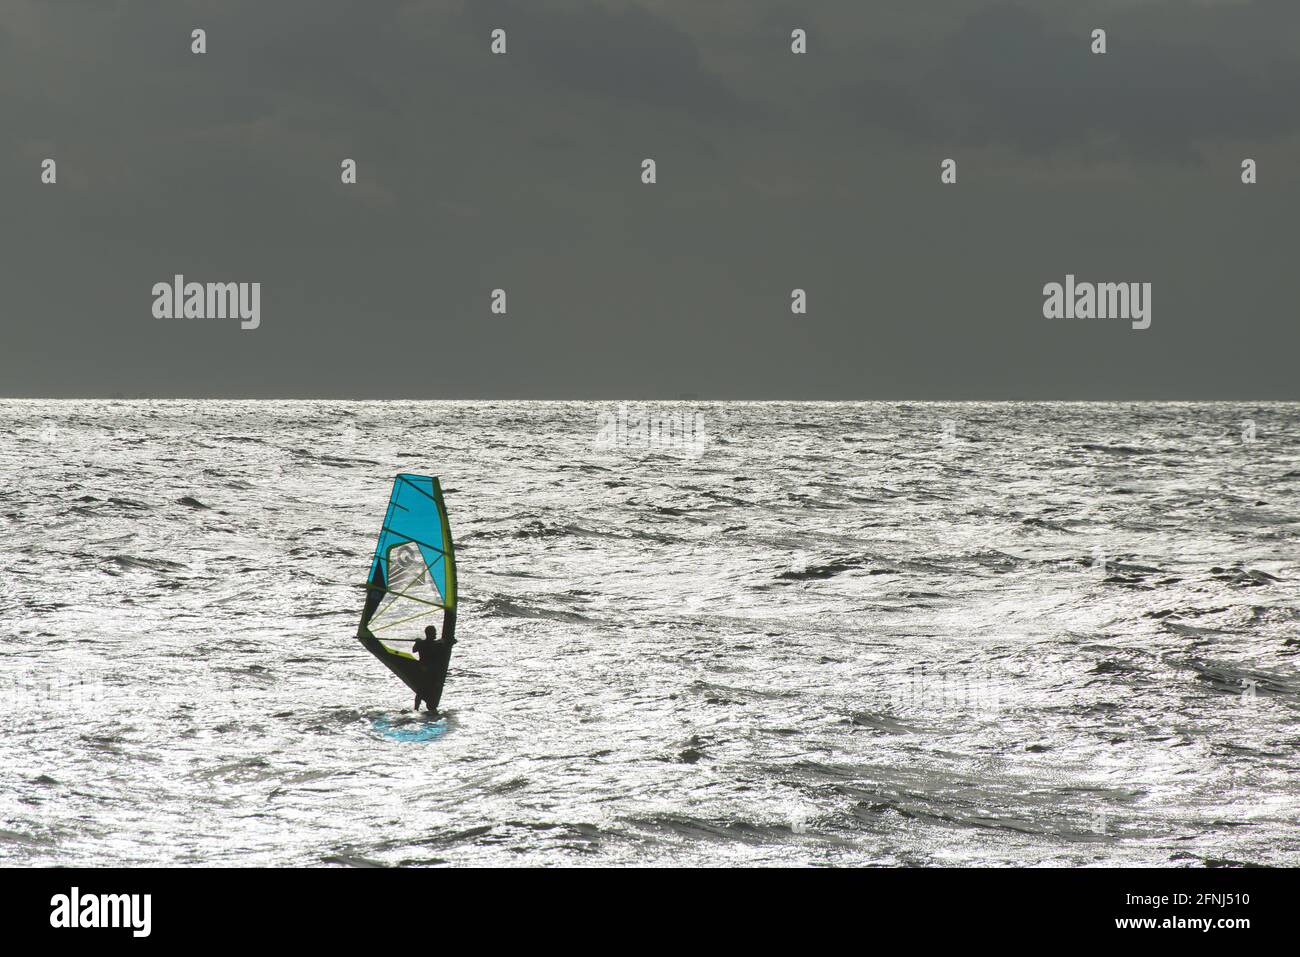 Memorable image of a single windsurfer with blue sail on a silvery sea with silver horizon separating dark sky backdrop Stock Photo